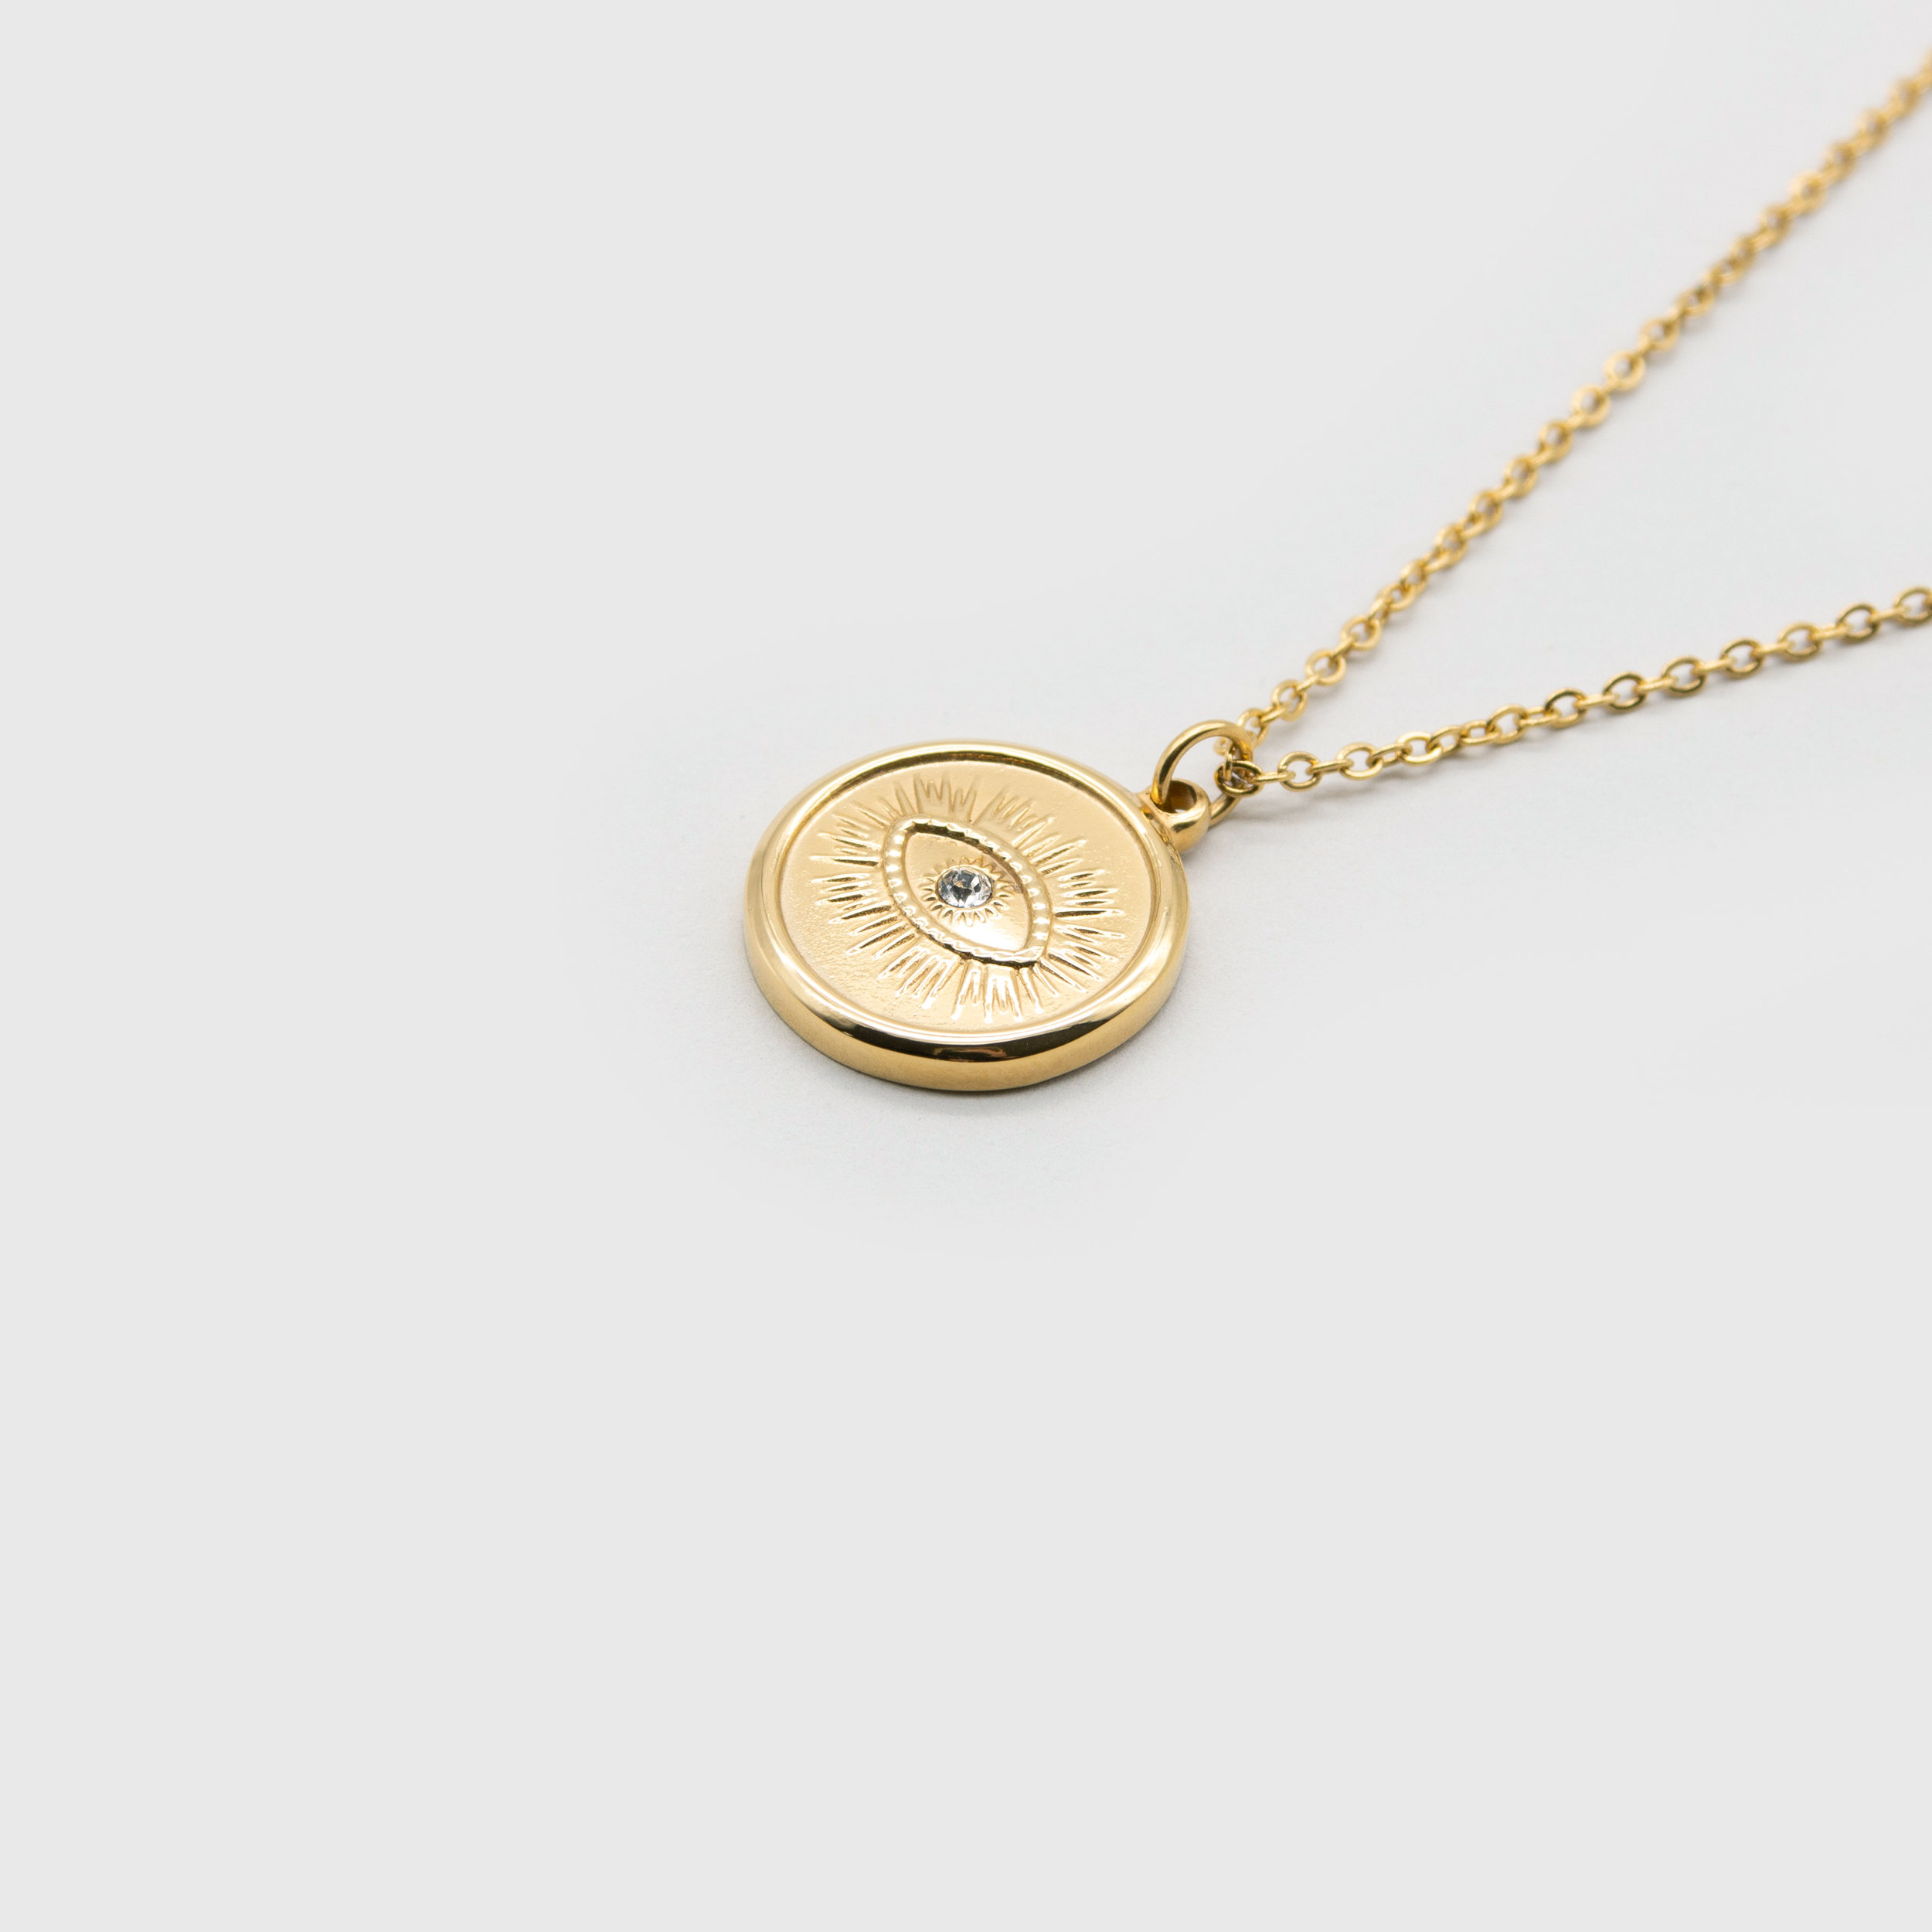 Kuku gold eye coin necklace with stone